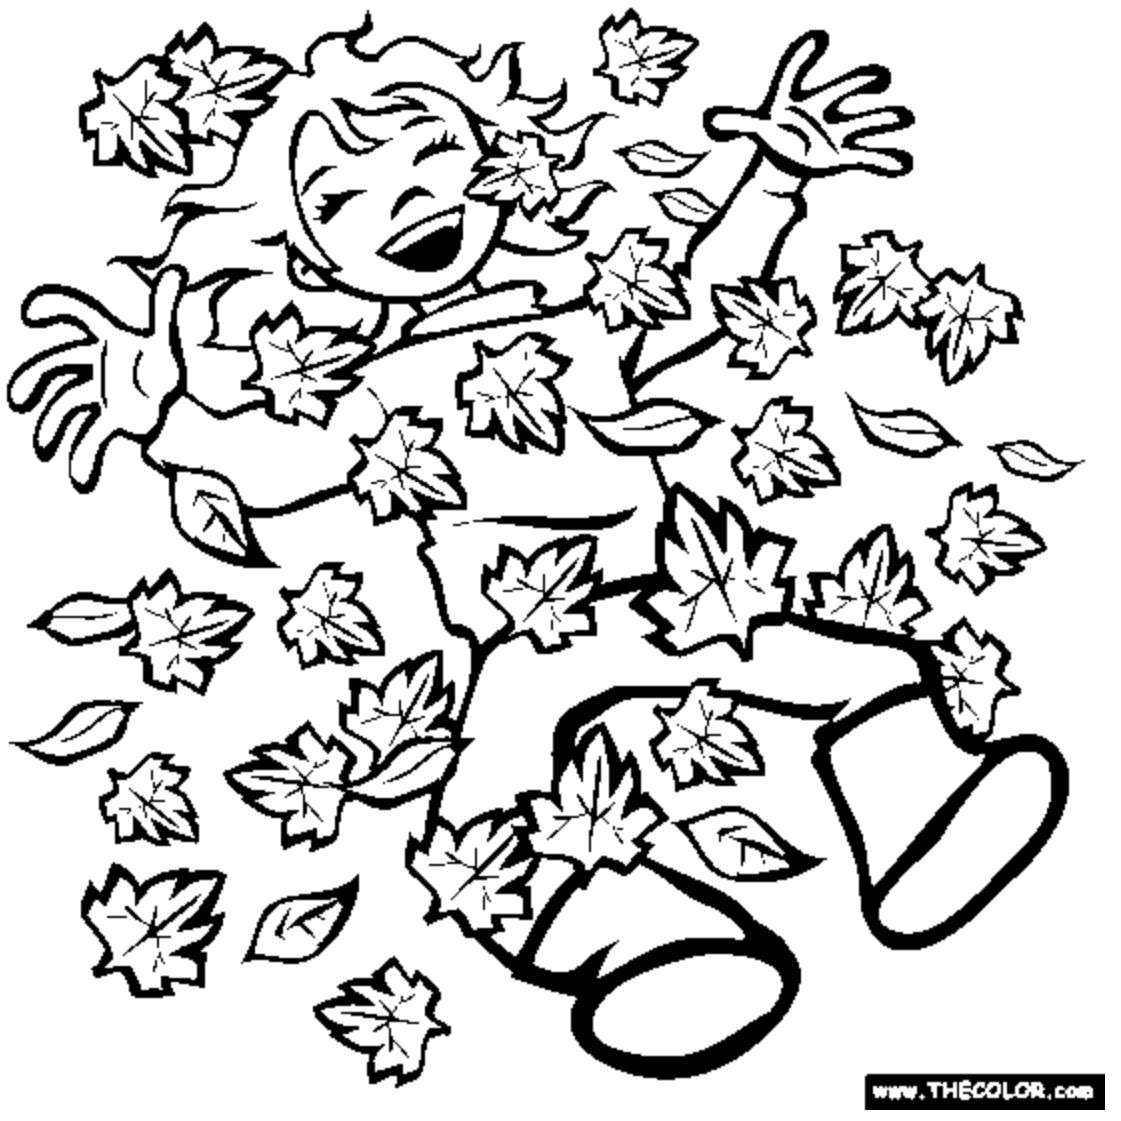 Autumn Season Coloring Pages - Coloring Home